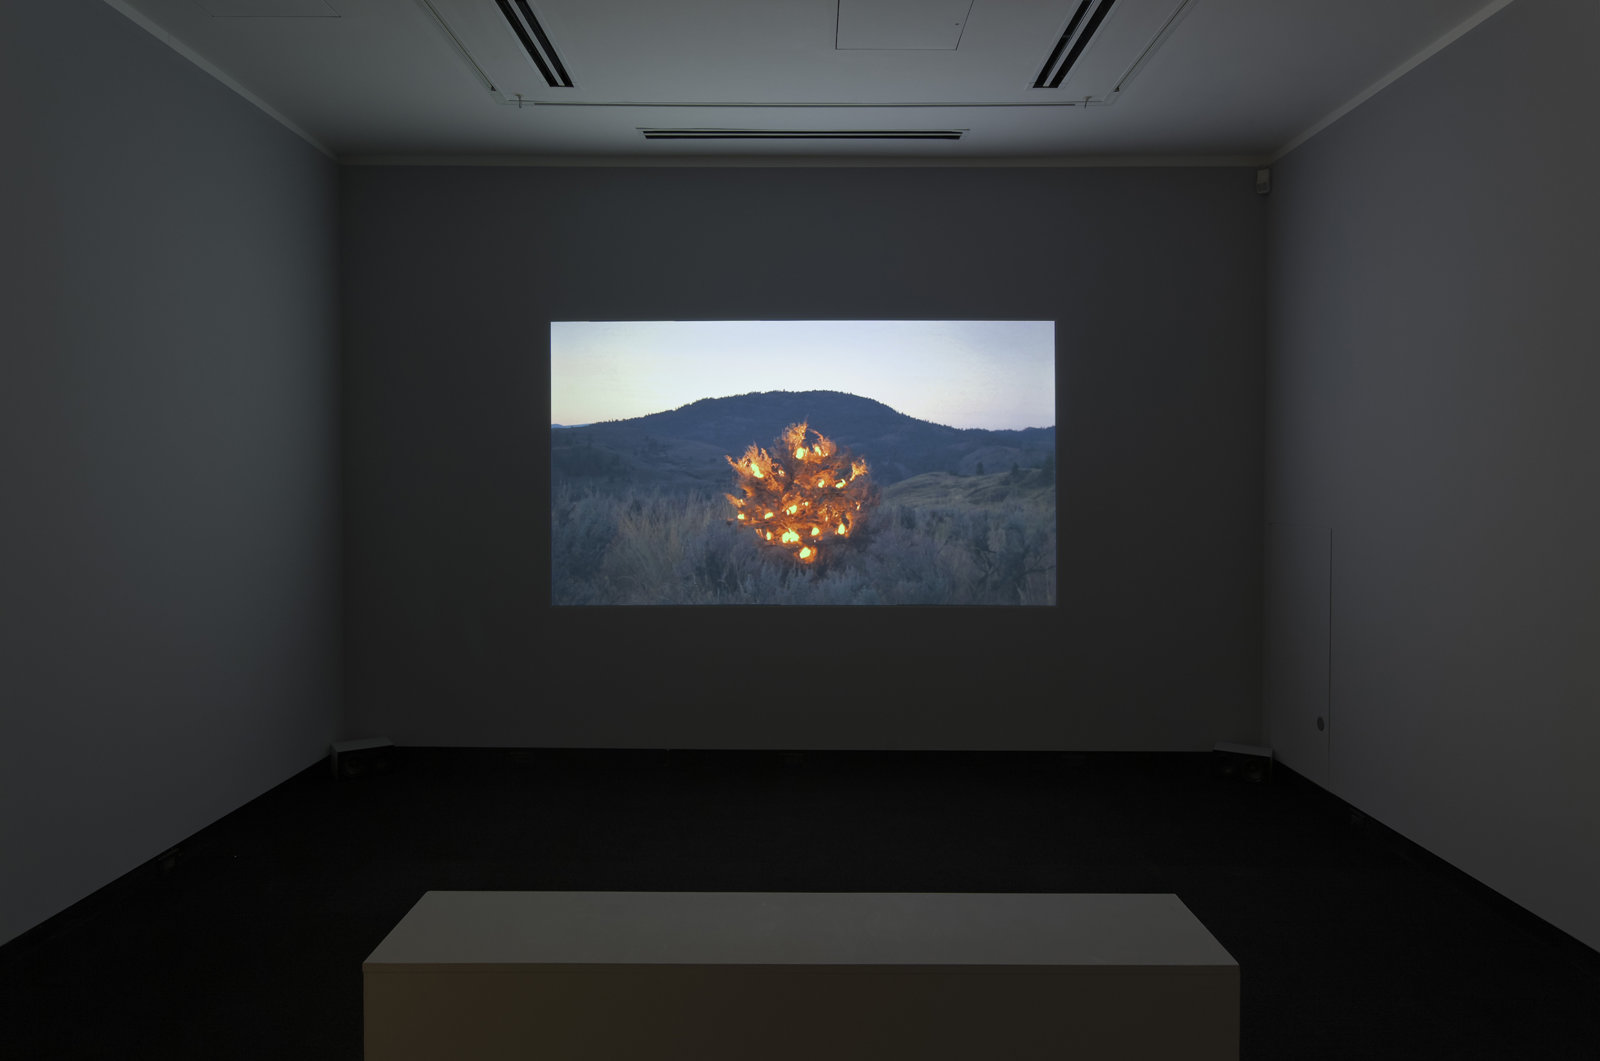 Kevin Schmidt, Burning Bush, 2005, HD video loop, 5 hours, 3 minutes. Installation view, Don't Stop Believing, Justina M. Barnicke Gallery, Toronto, 2011